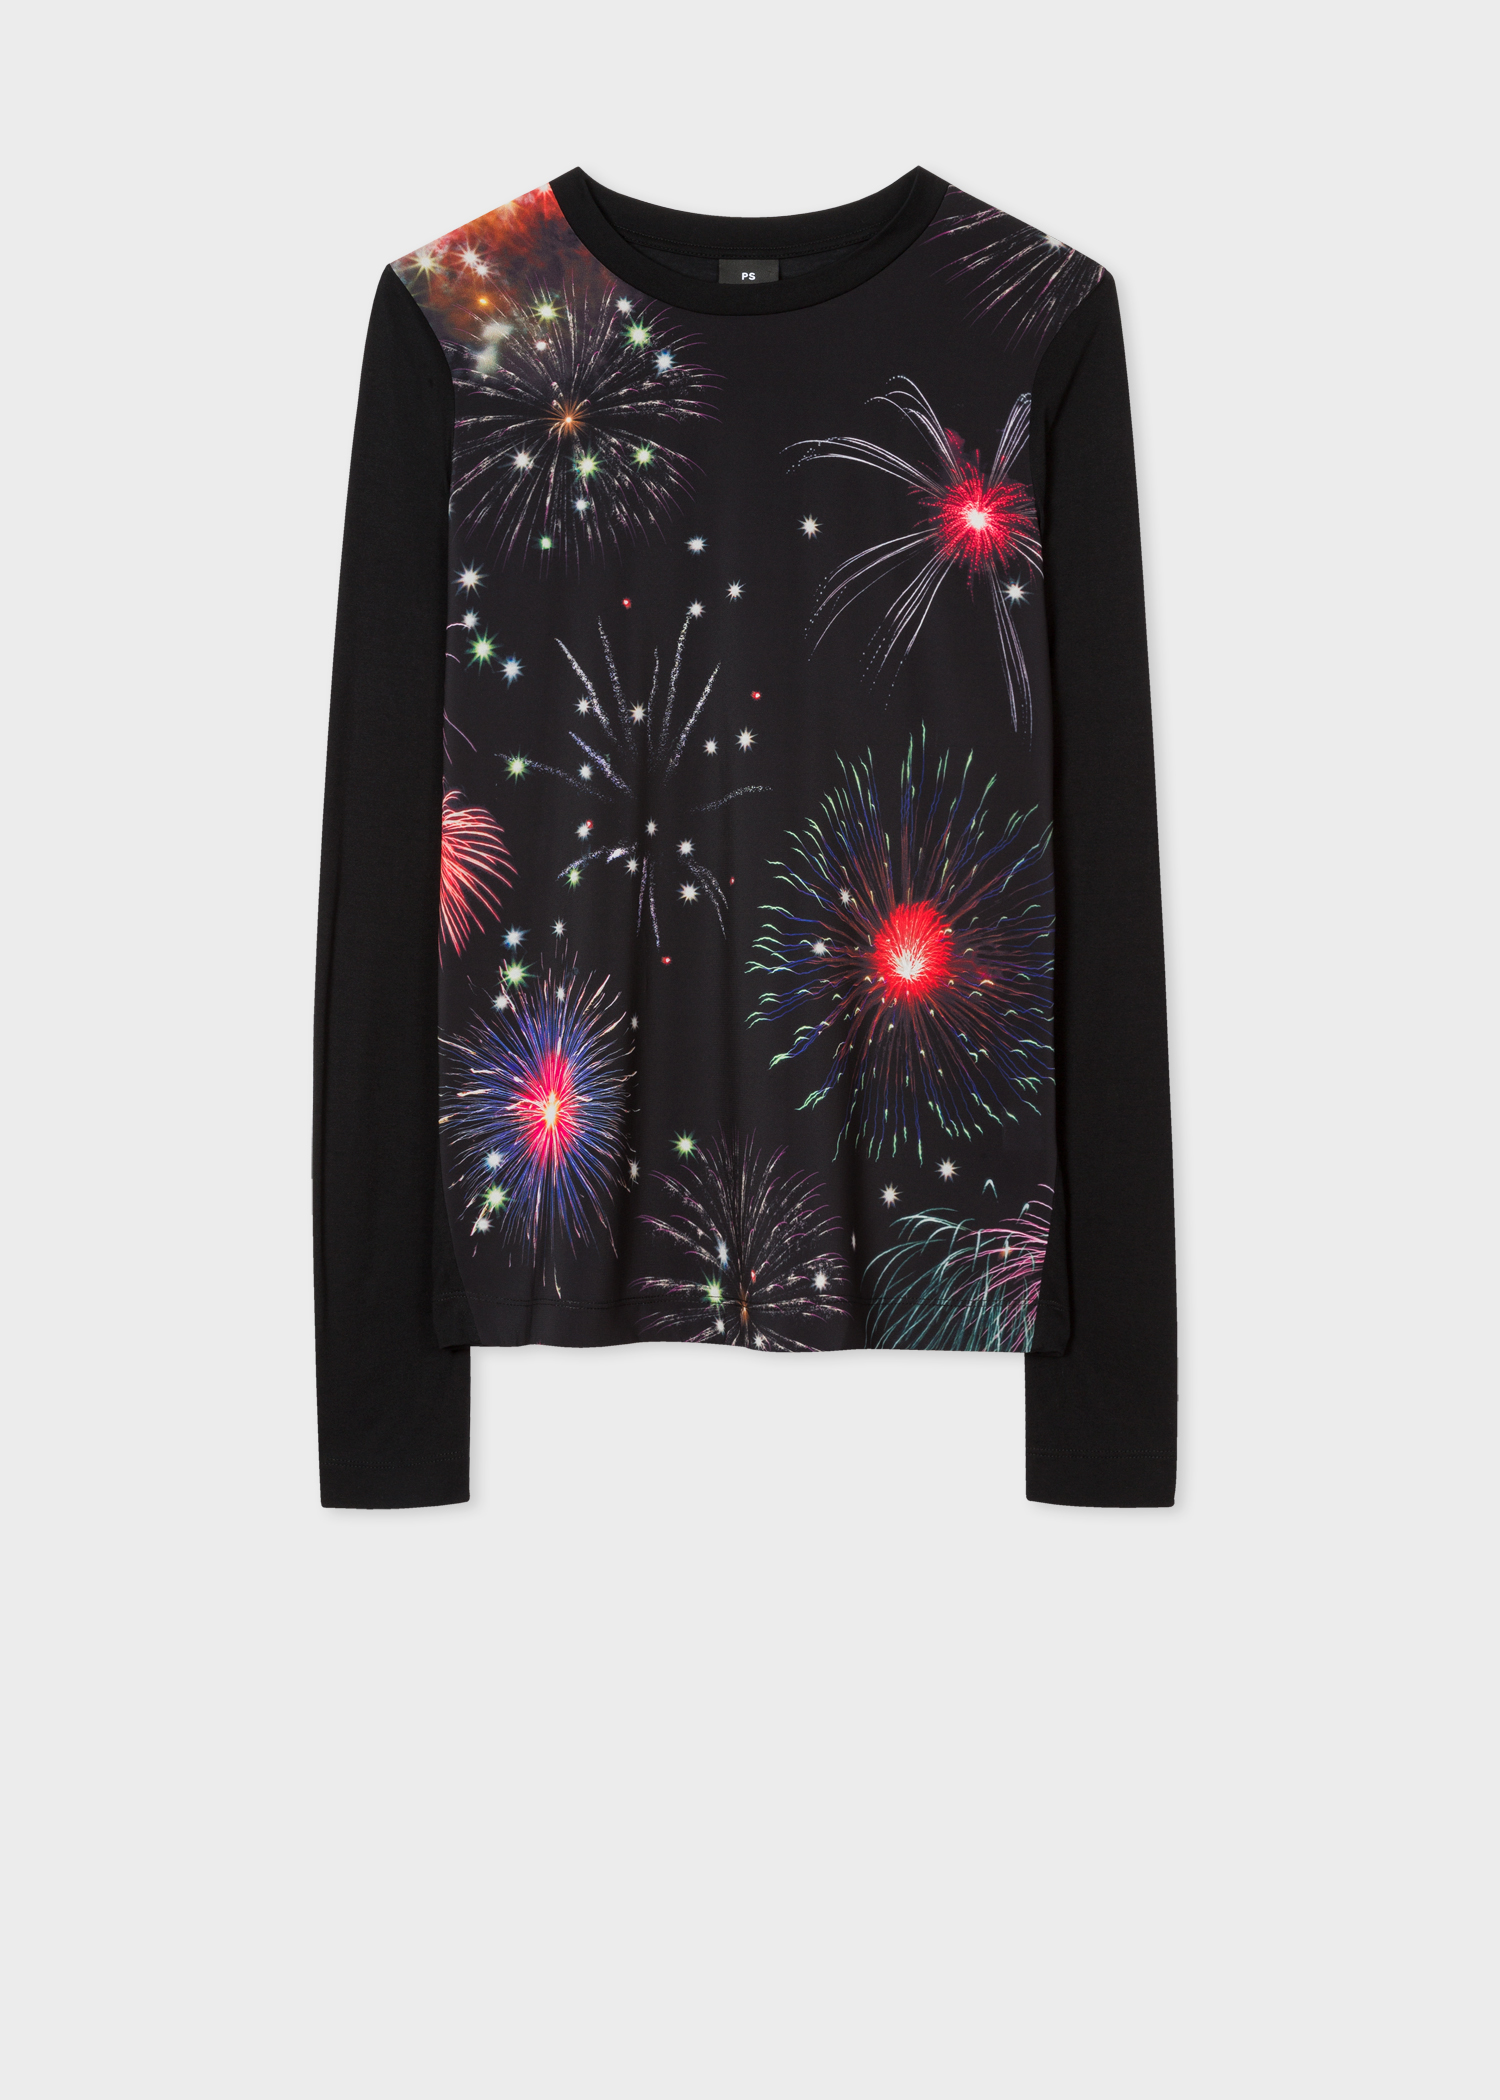 Front View - Women's Black 'Fireworks' Long-Sleeve T-Shirt Paul Smith